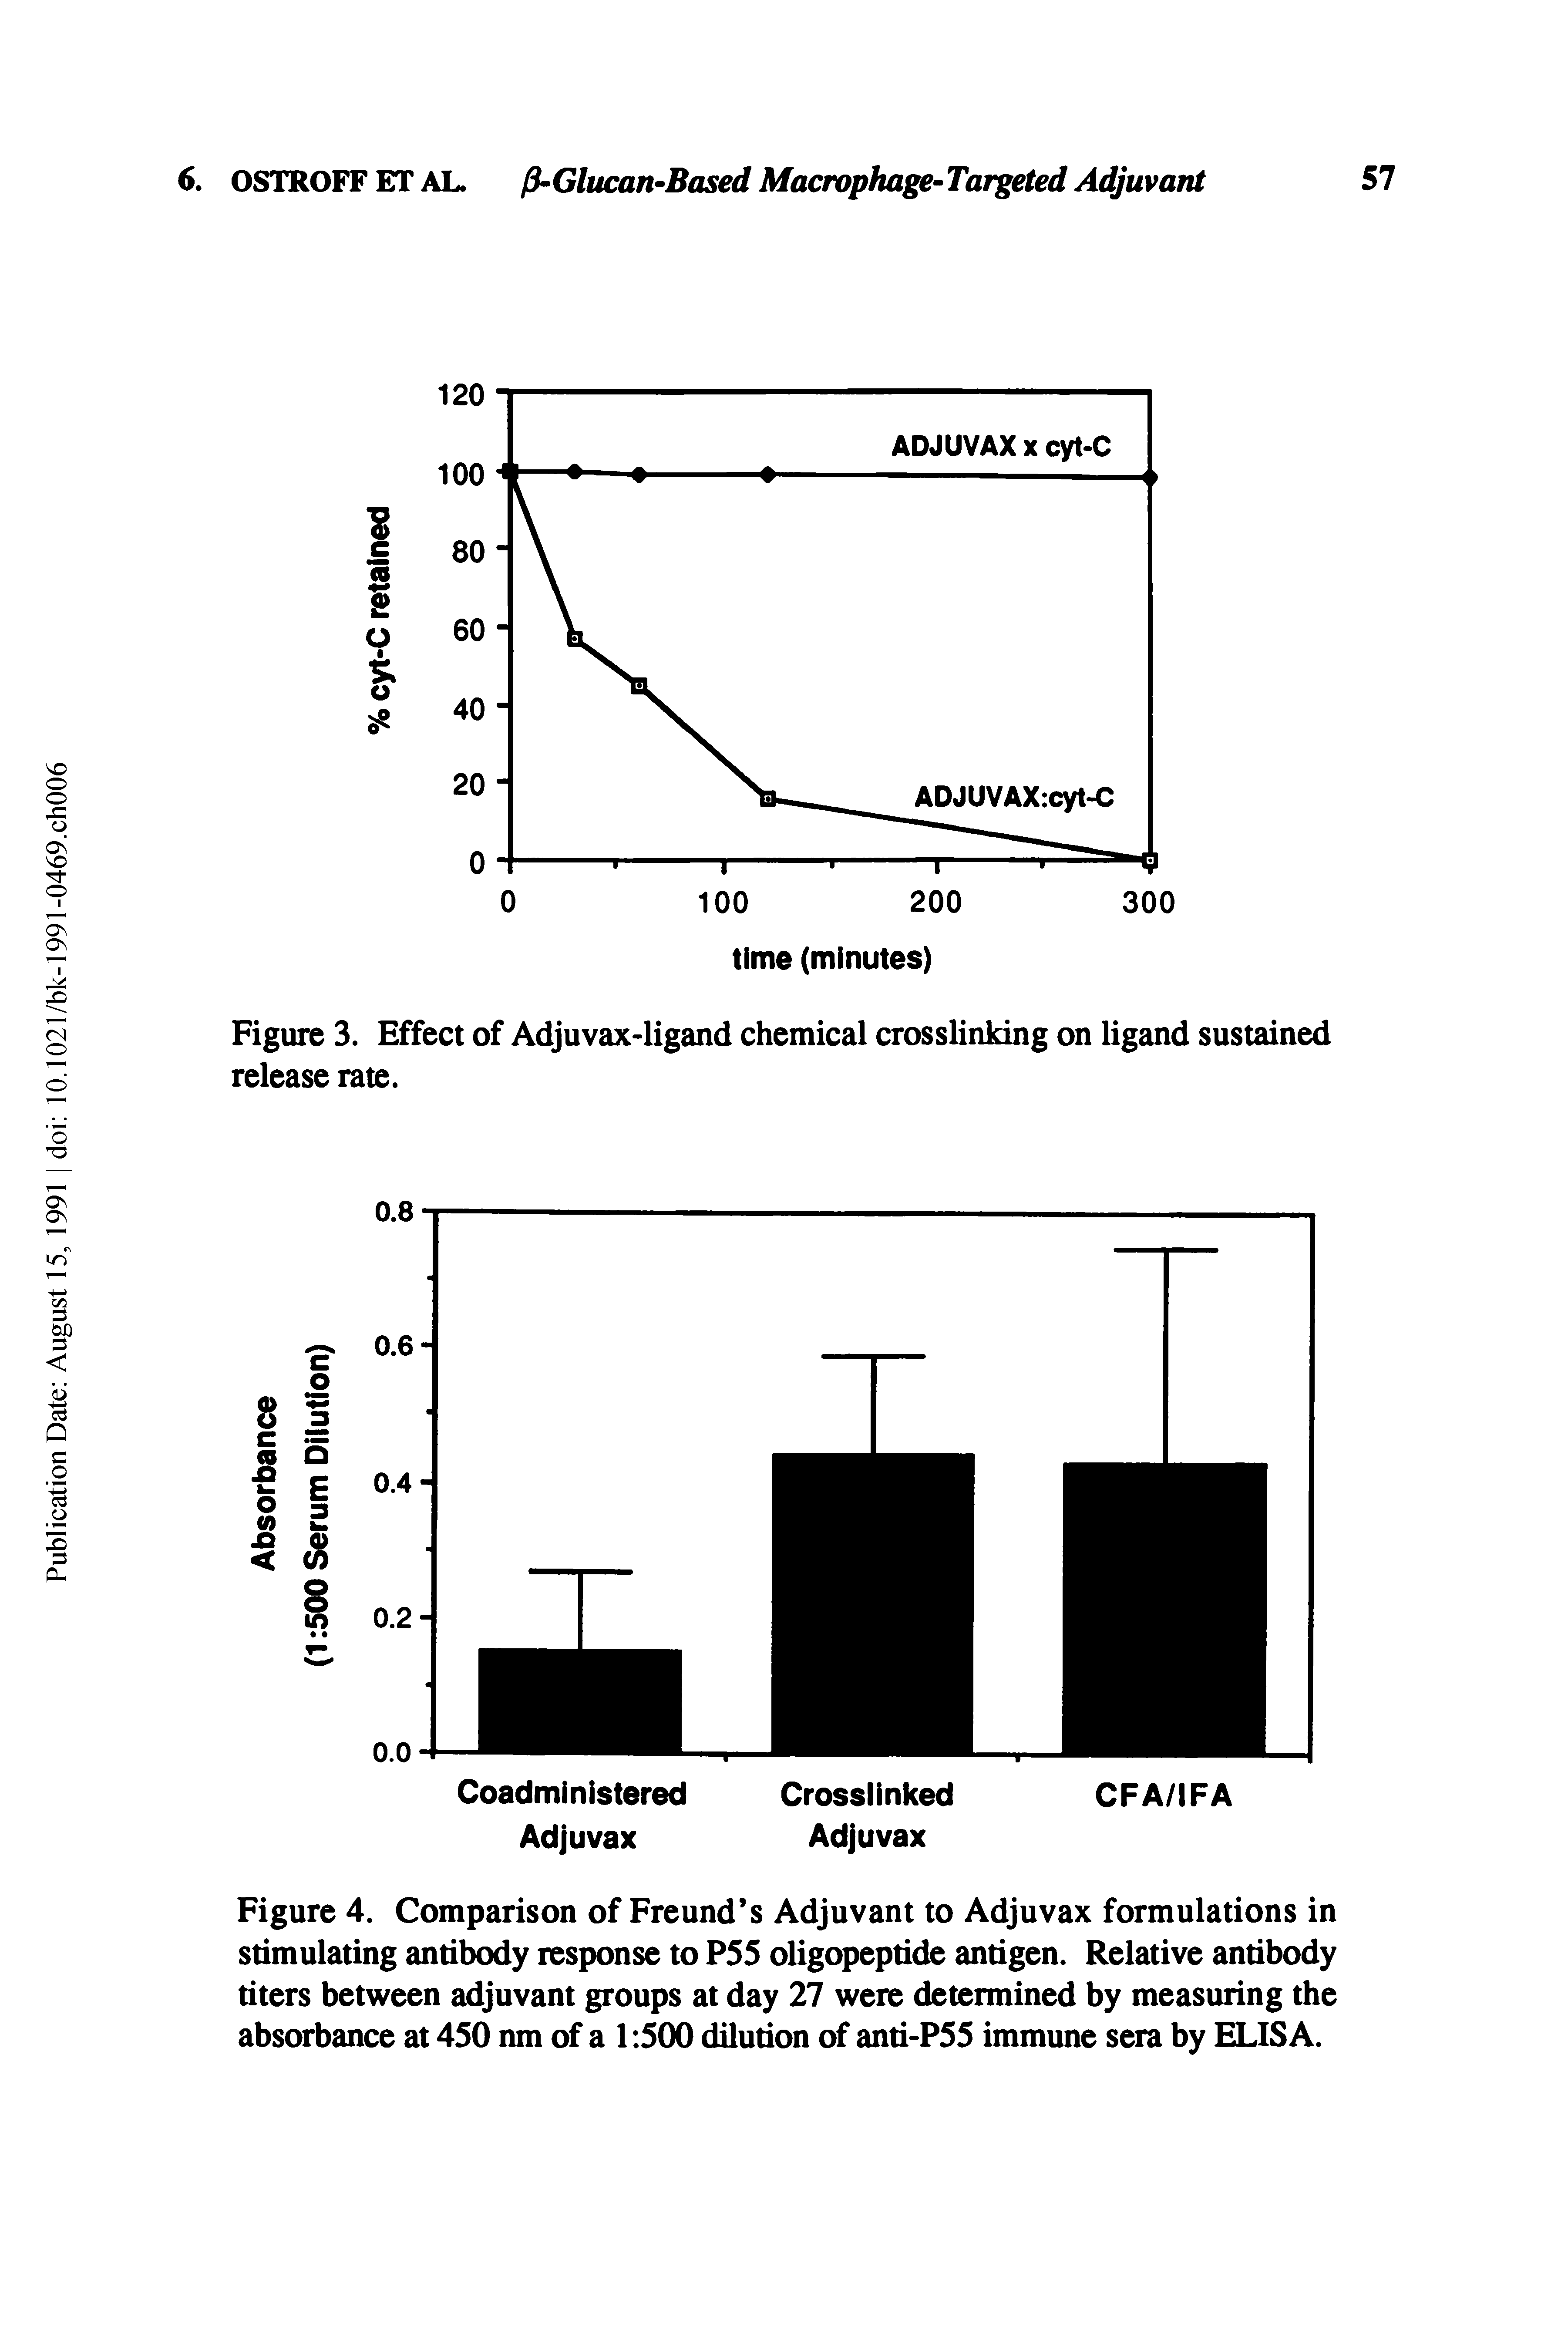 Figure 3. Effect of Adjuvax-ligand chemical crosslinking on ligand sustained release rate.